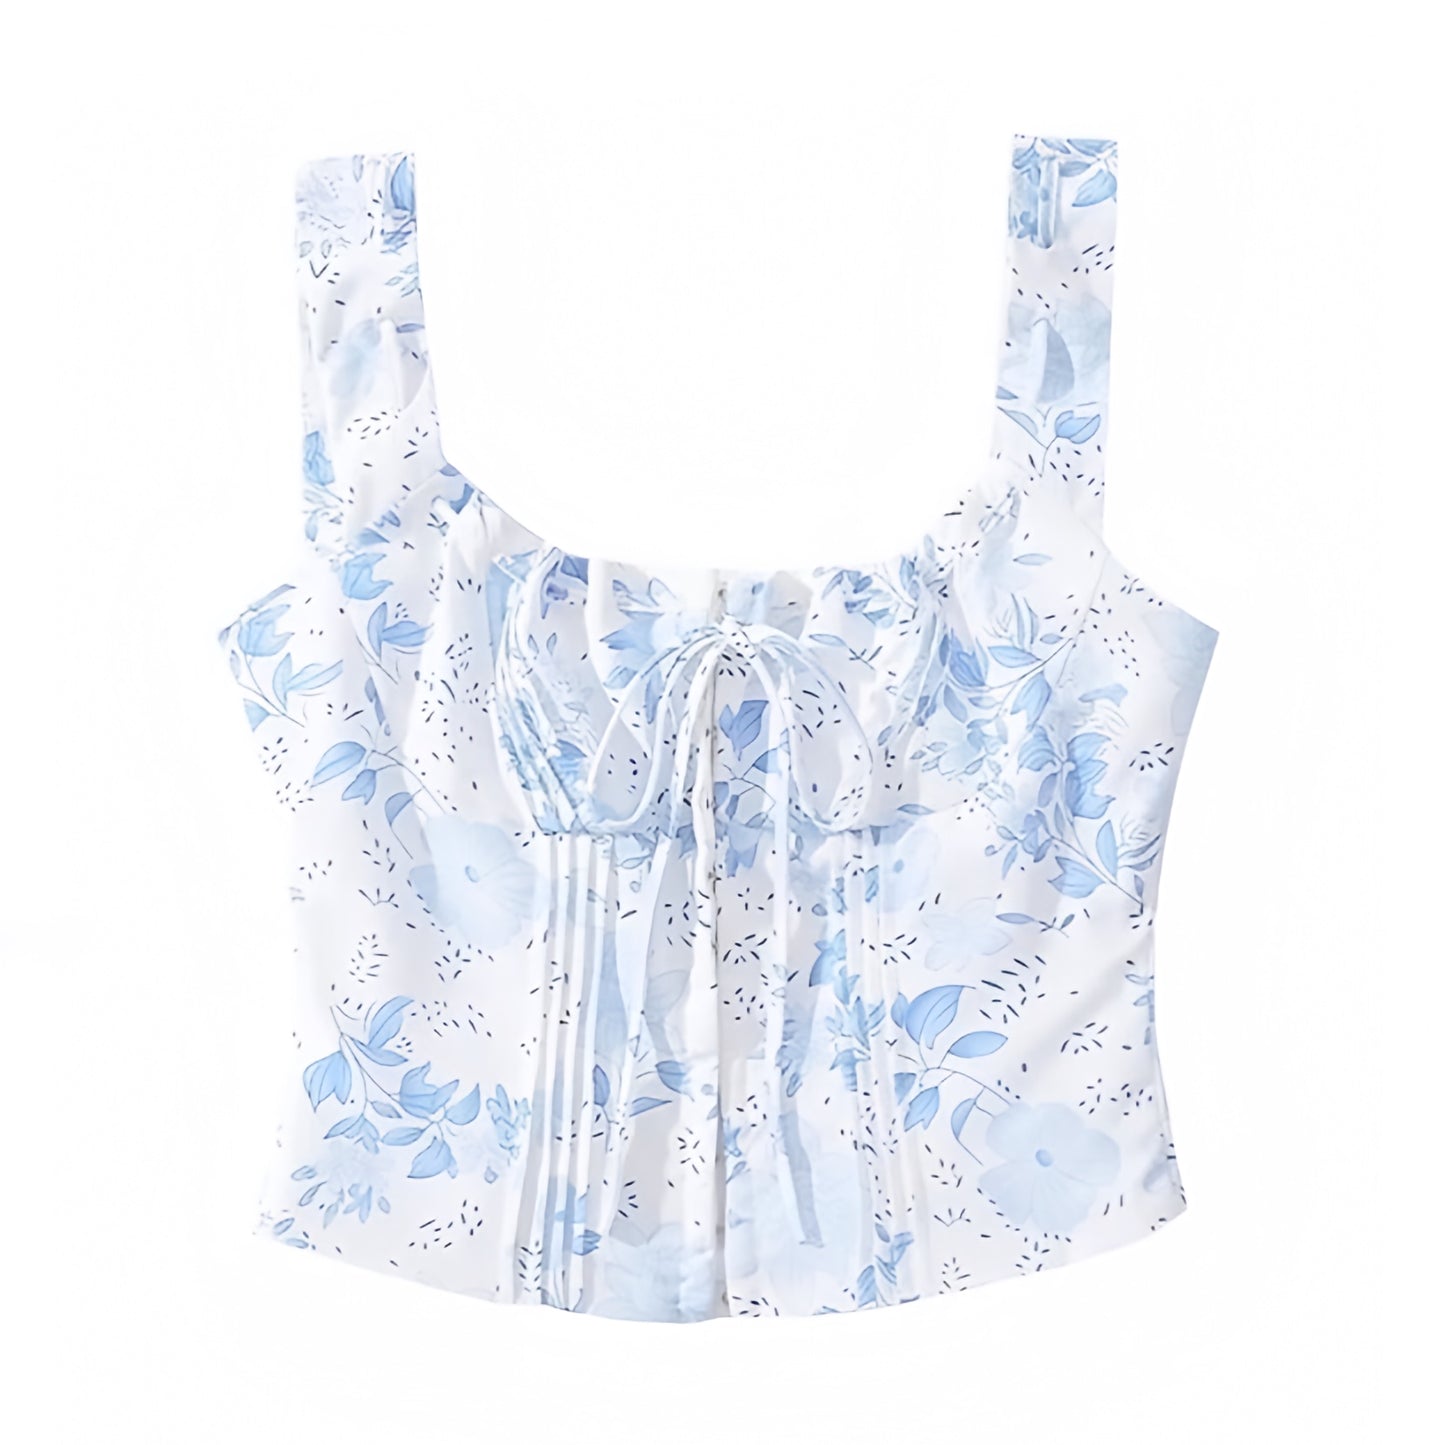 floral-print-light-blue-and-white-multi-color-flower-patterned-slim-fit-bodycon-corset-bustier-bow-string-tie-spaghetti-strap-sleeveless-square-neckline-backless-open-back-full-length-hip-crop-camisole-tank-top-blouse-shirt-women-ladies-teens-tweens-chic-trendy-spring-2024-summer-elgeant-casual-feminine-preppy-style-coquette-coastal-granddaughter-grandmillennial-beach-wear-vacation-tops-altard-state-zara-loveshackfancy-aritzia-revolve-princess-polly-urban-outfitters-dupe